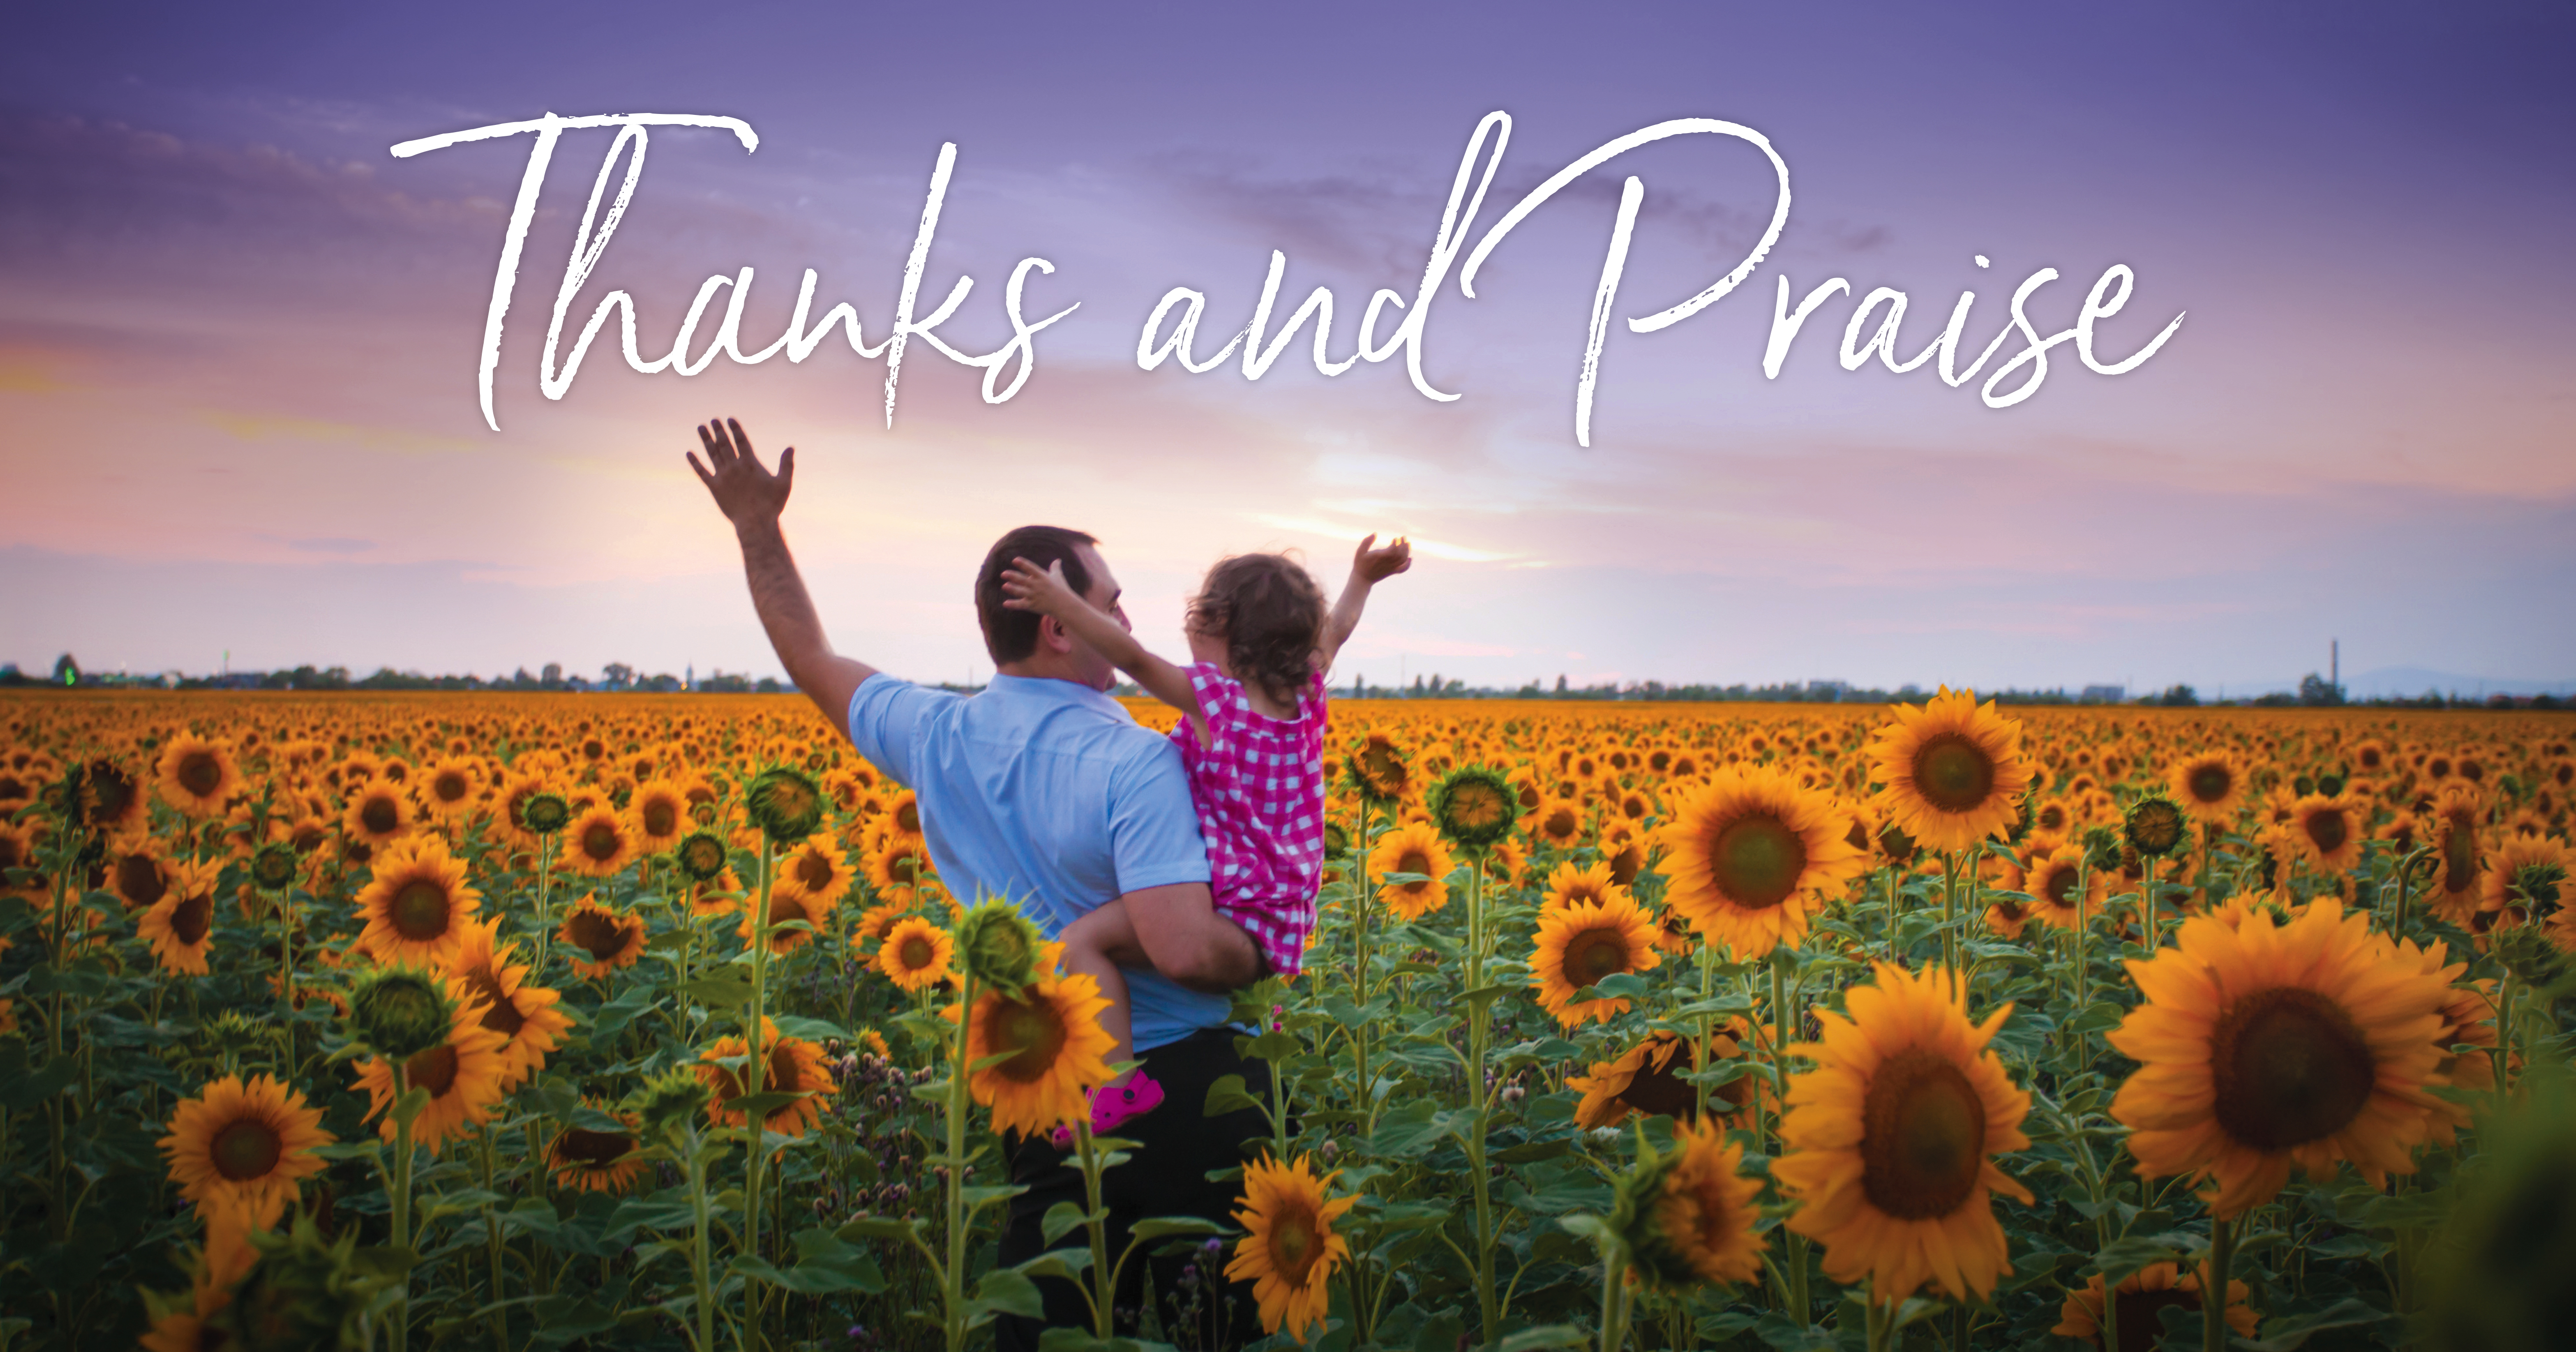 Daily Devotional | Thanking God for Rest